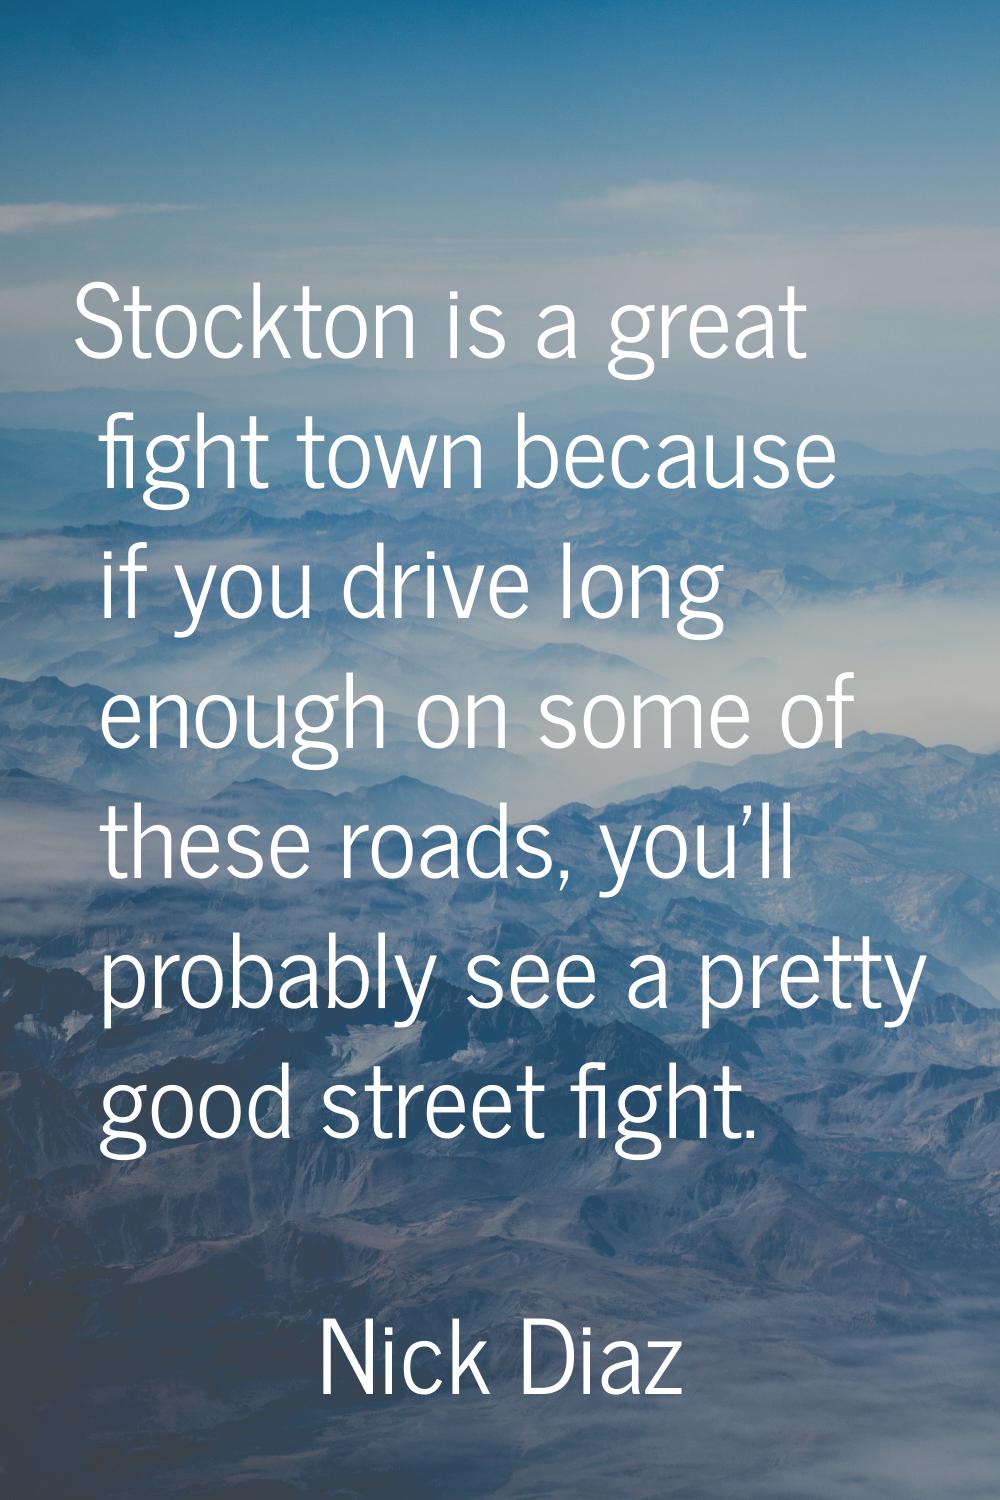 Stockton is a great fight town because if you drive long enough on some of these roads, you'll prob